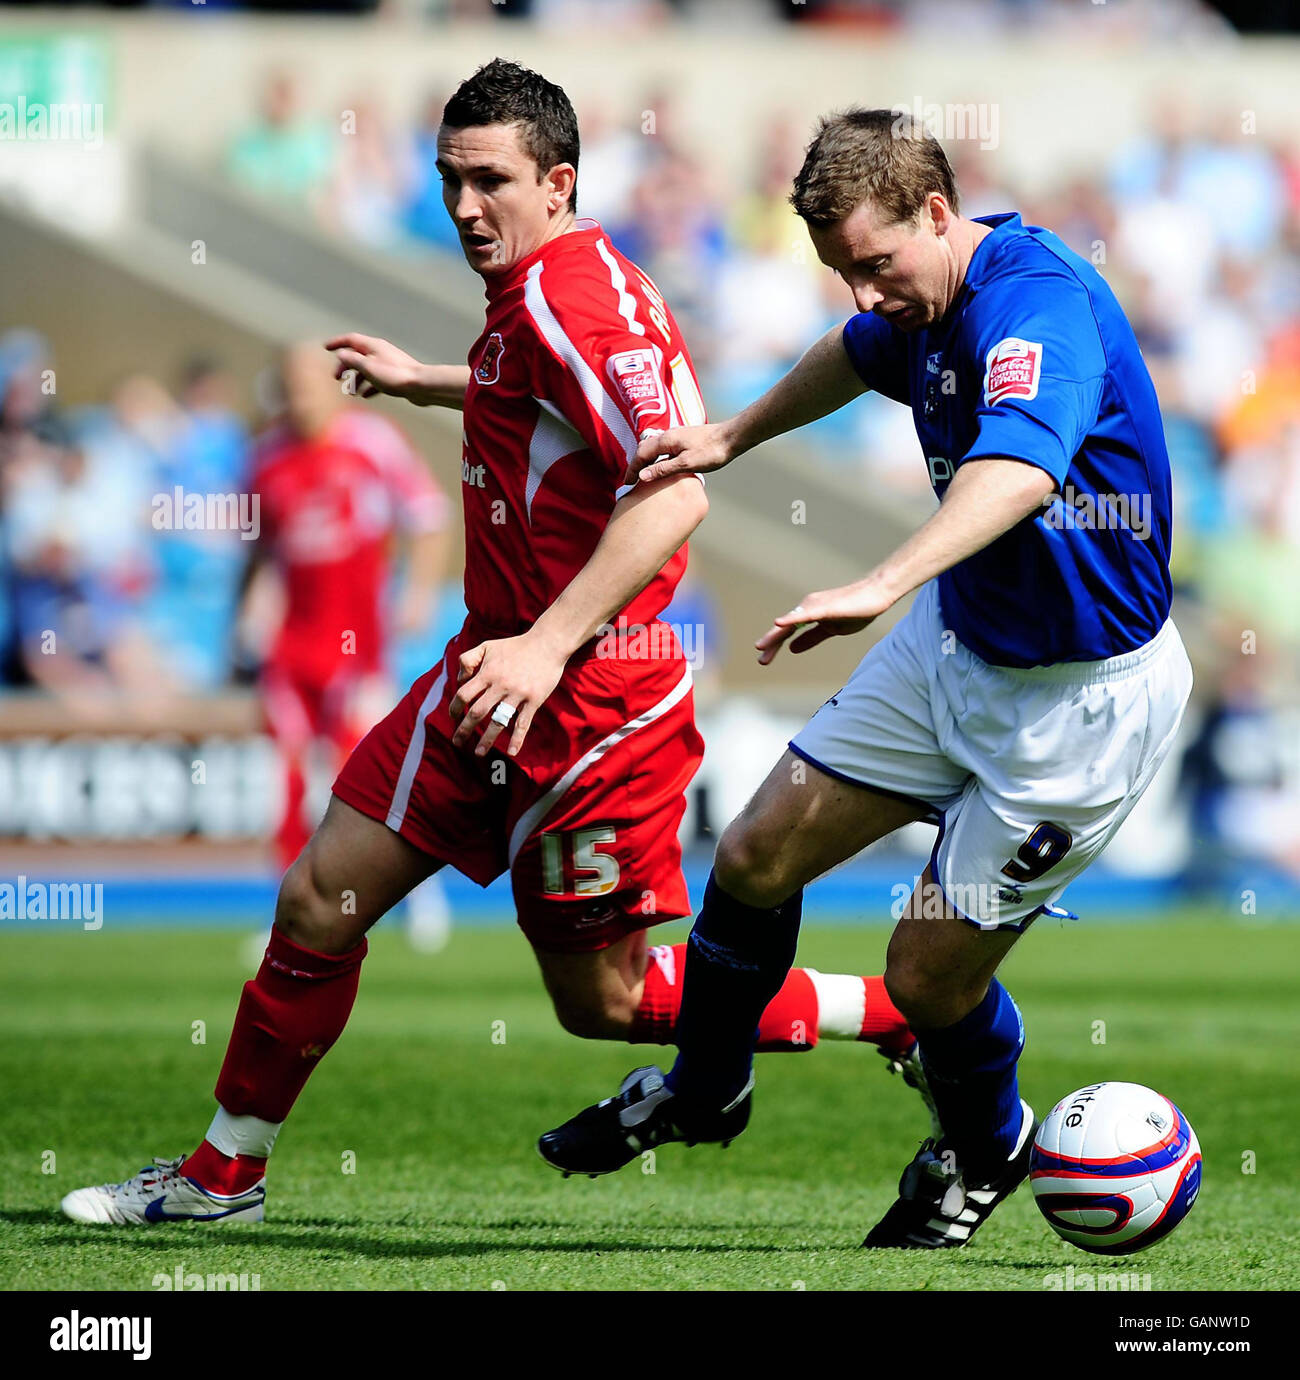 Millwall's Neill Harris and Carlisle United's Paul Arnison battle for the ball during the Coca-Cola Football League One match at The Den, Millwall. Stock Photo